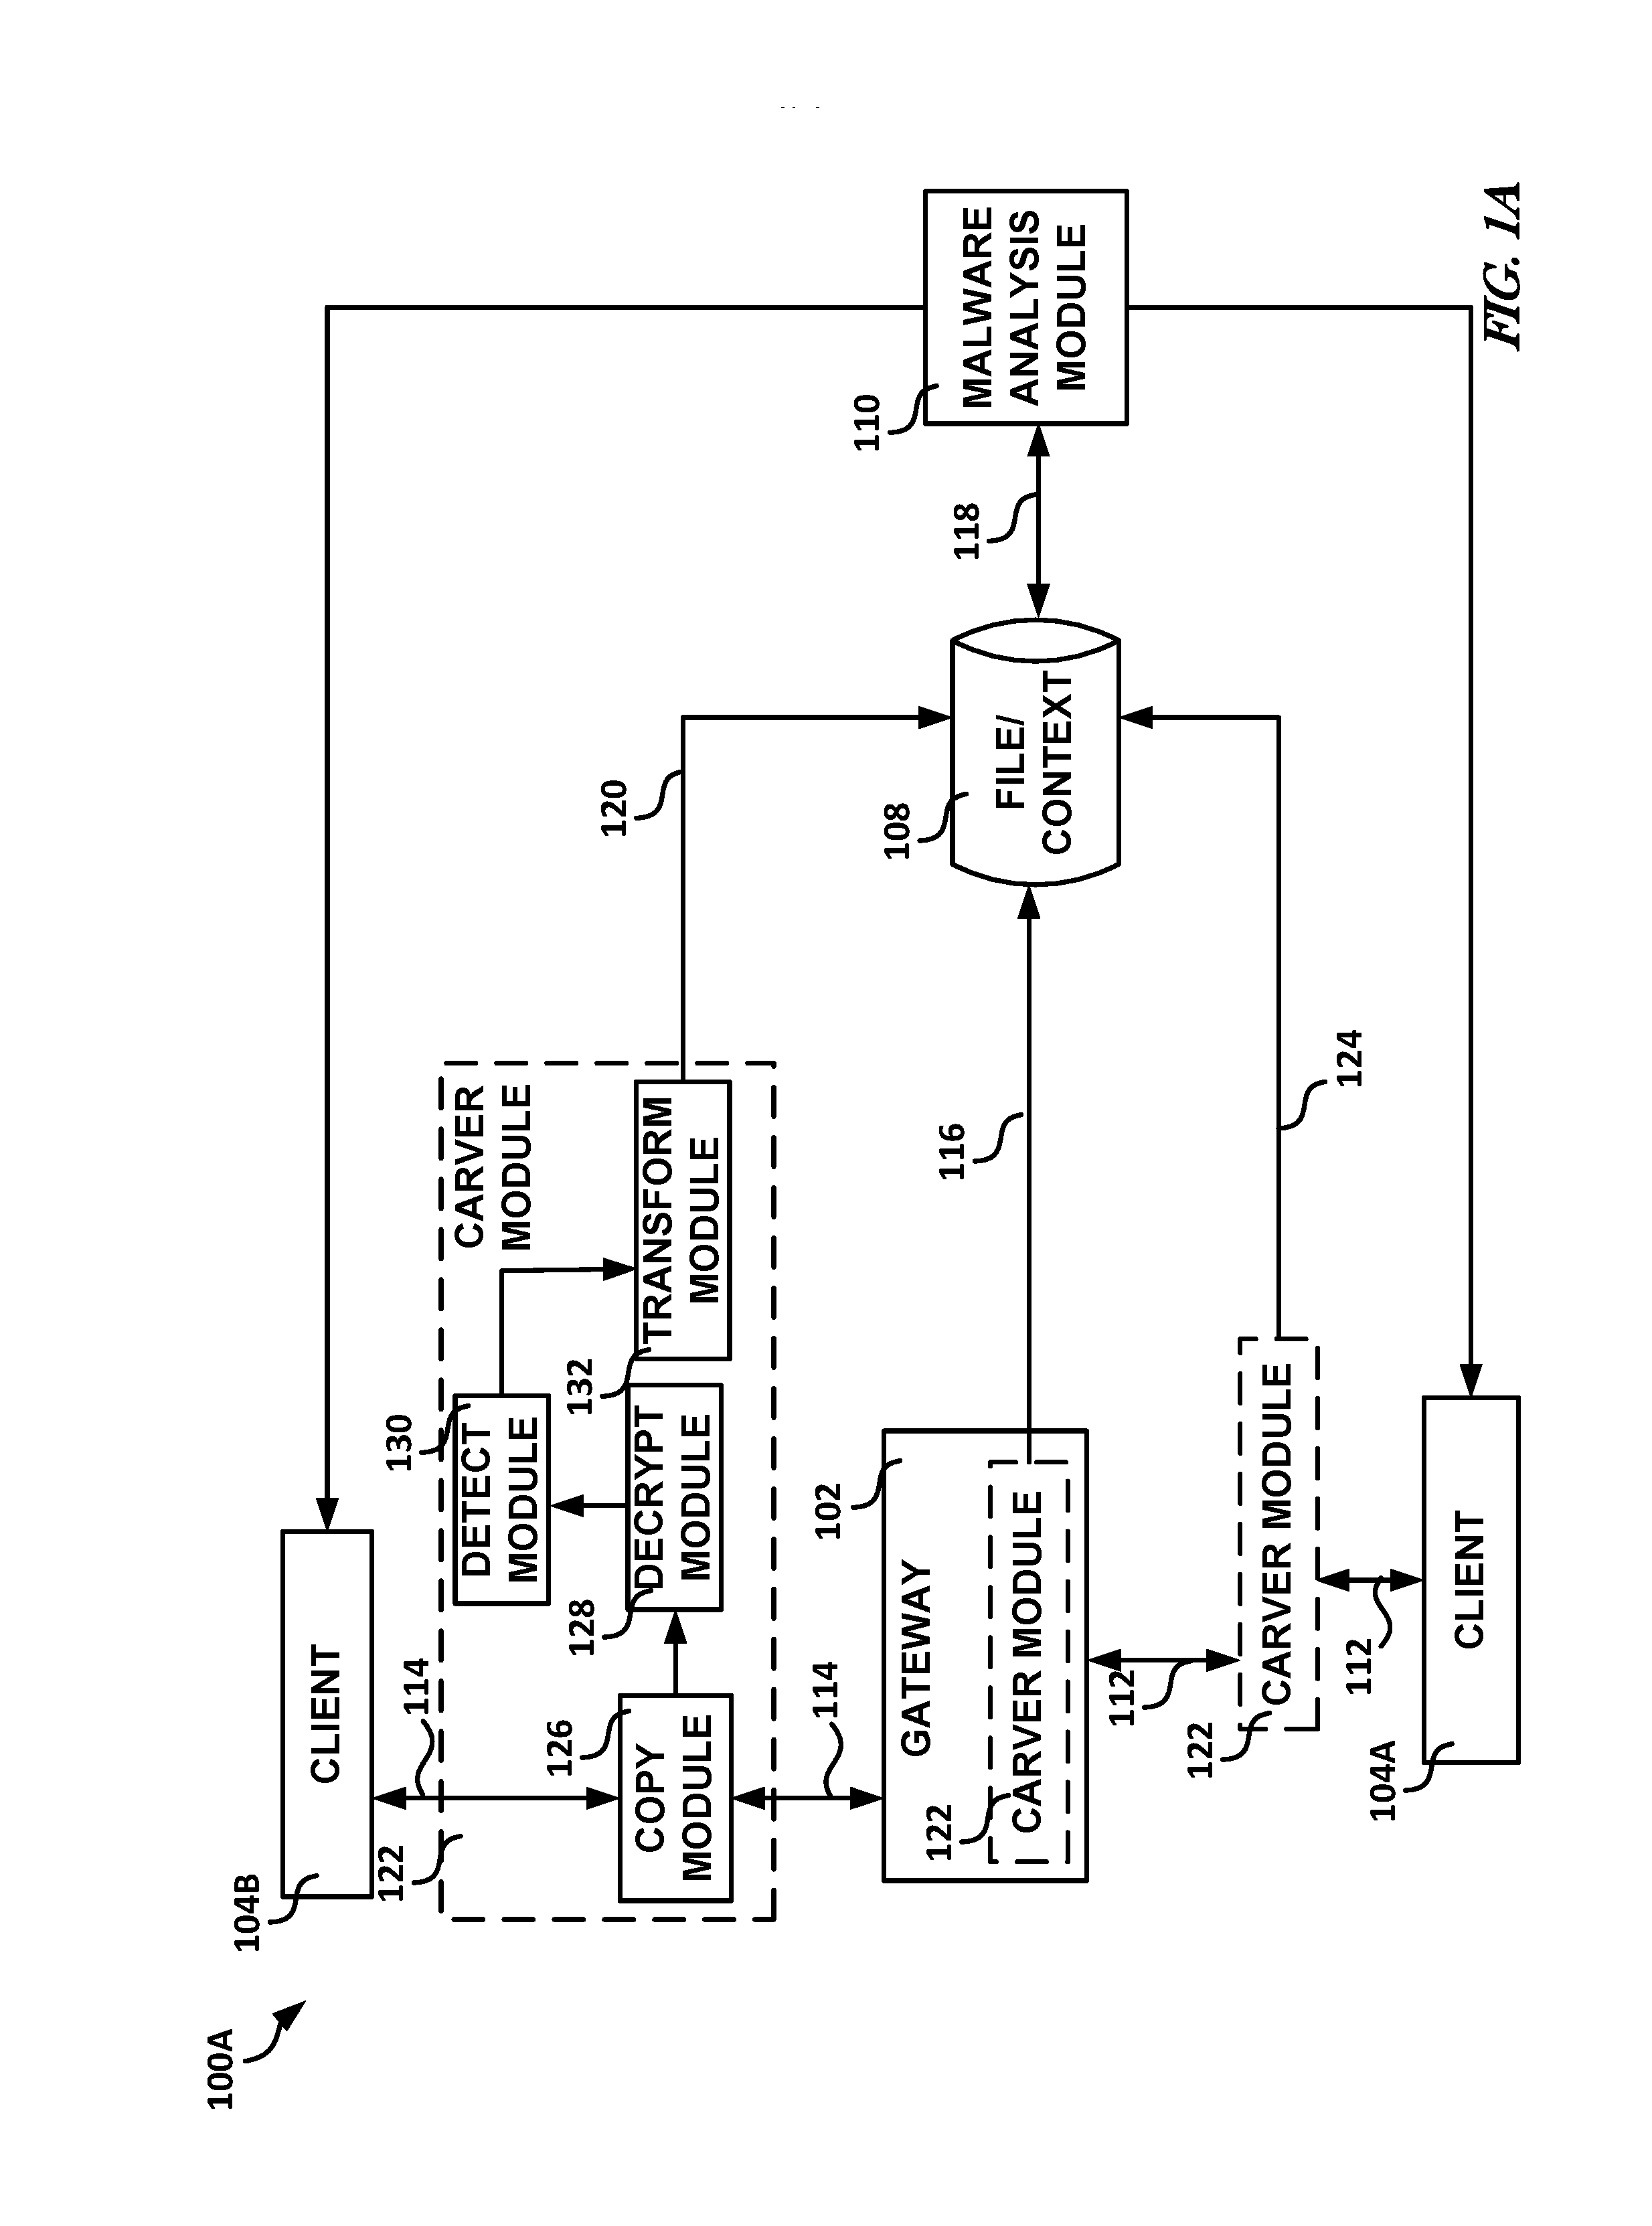 Systems and methods for malware analysis of network traffic